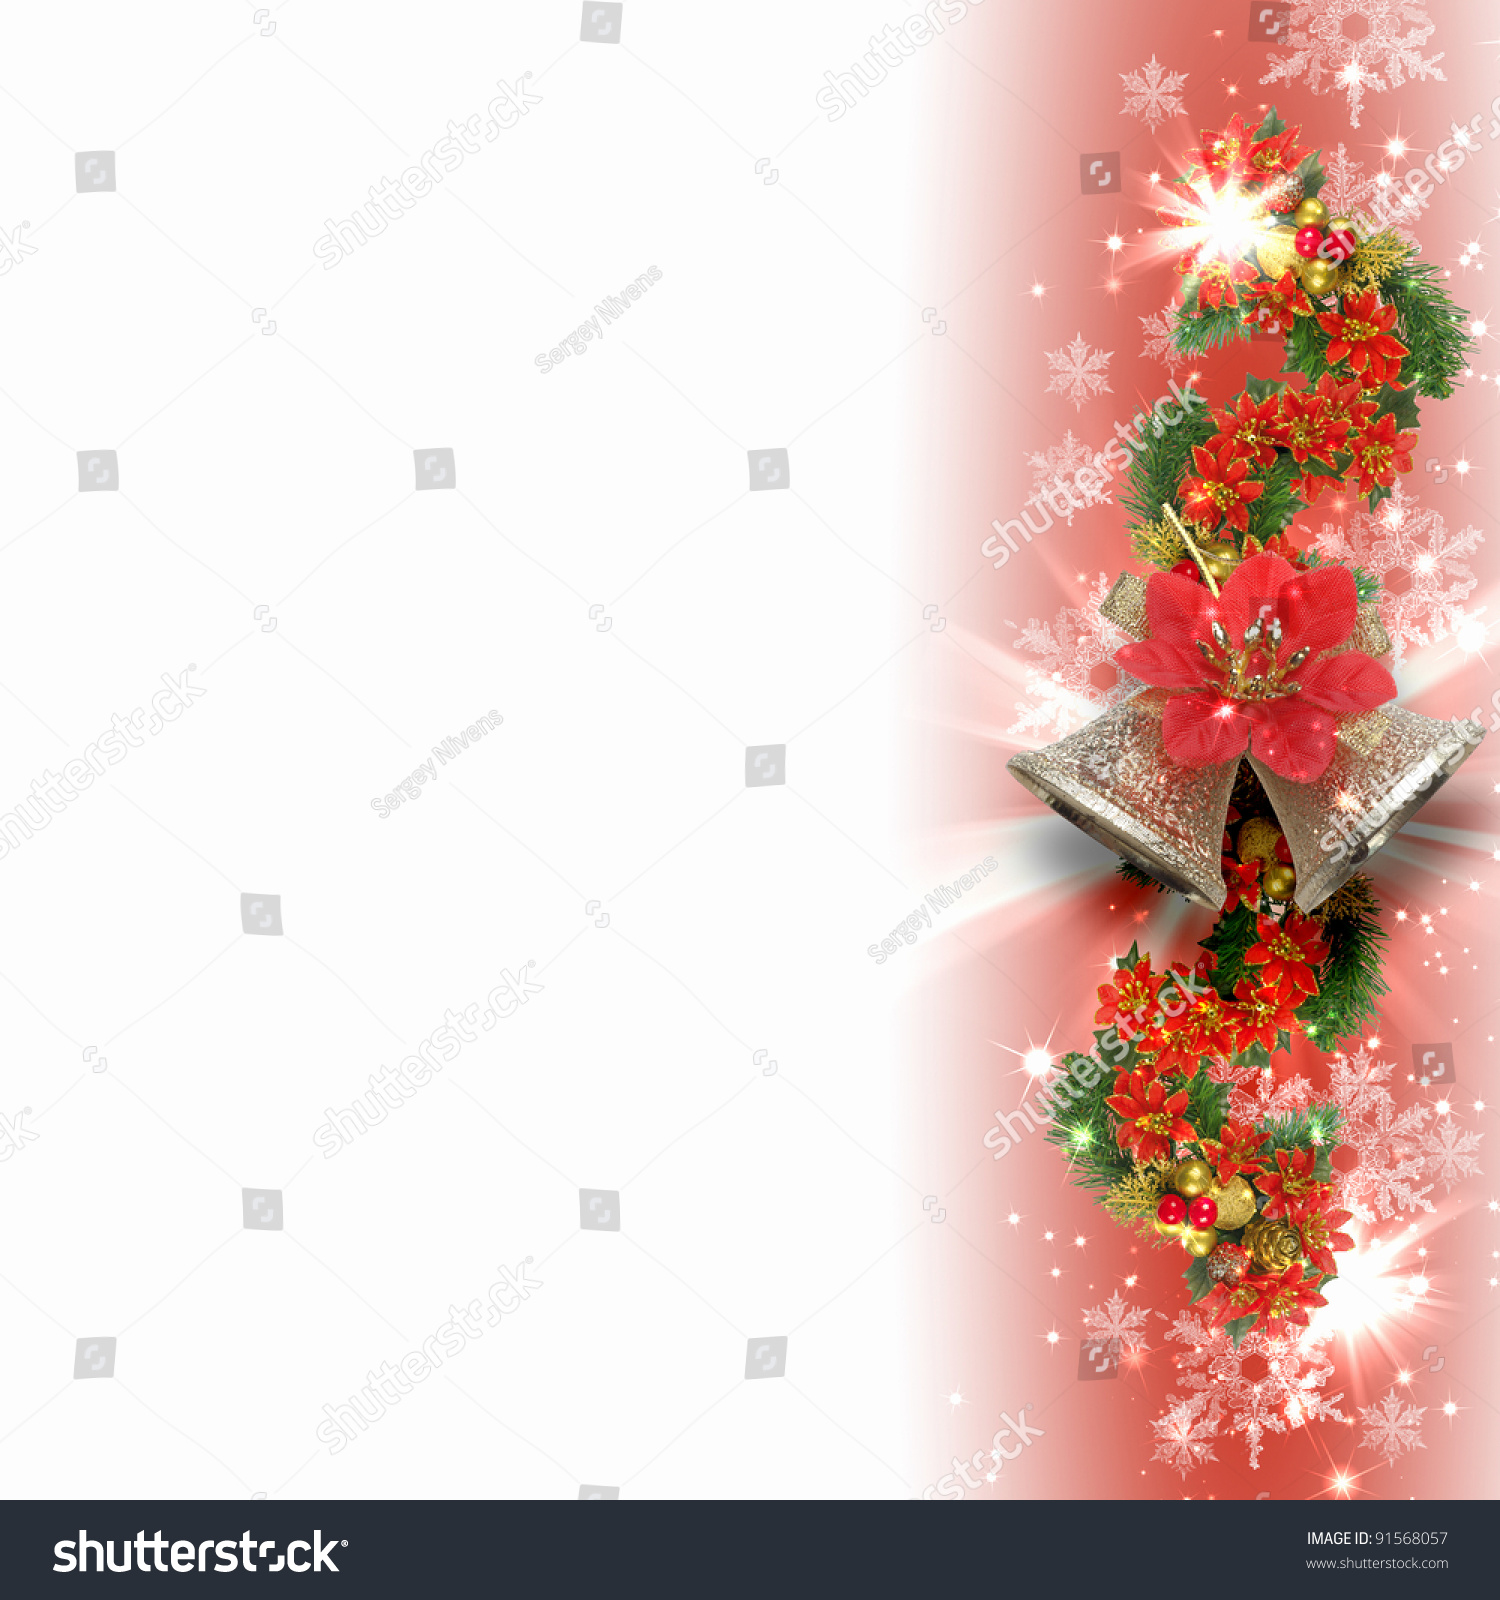 Illustration of background with traditional Christmas decoration ornament #91568057